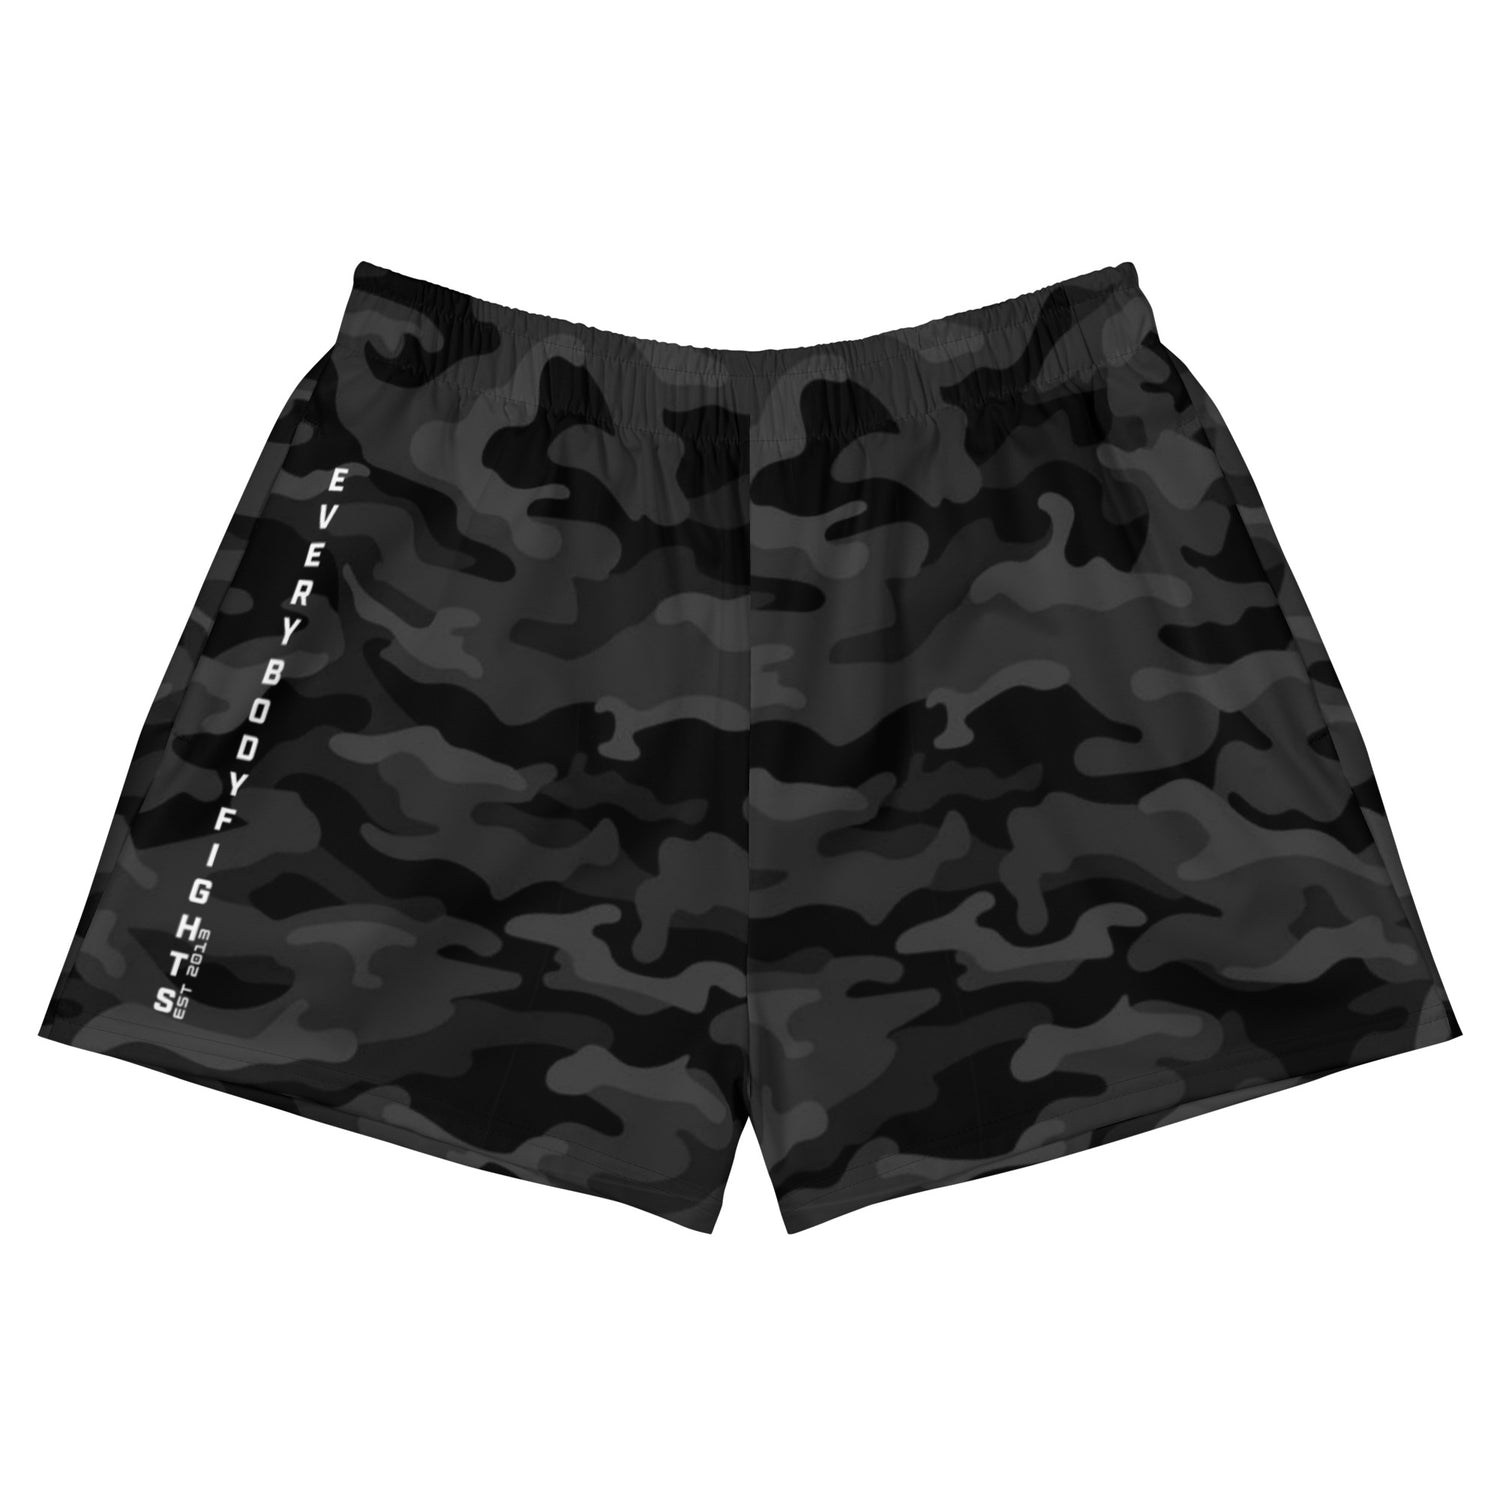 Women’s Recycled Athletic Camo Shorts EVERYBODYFIGHT